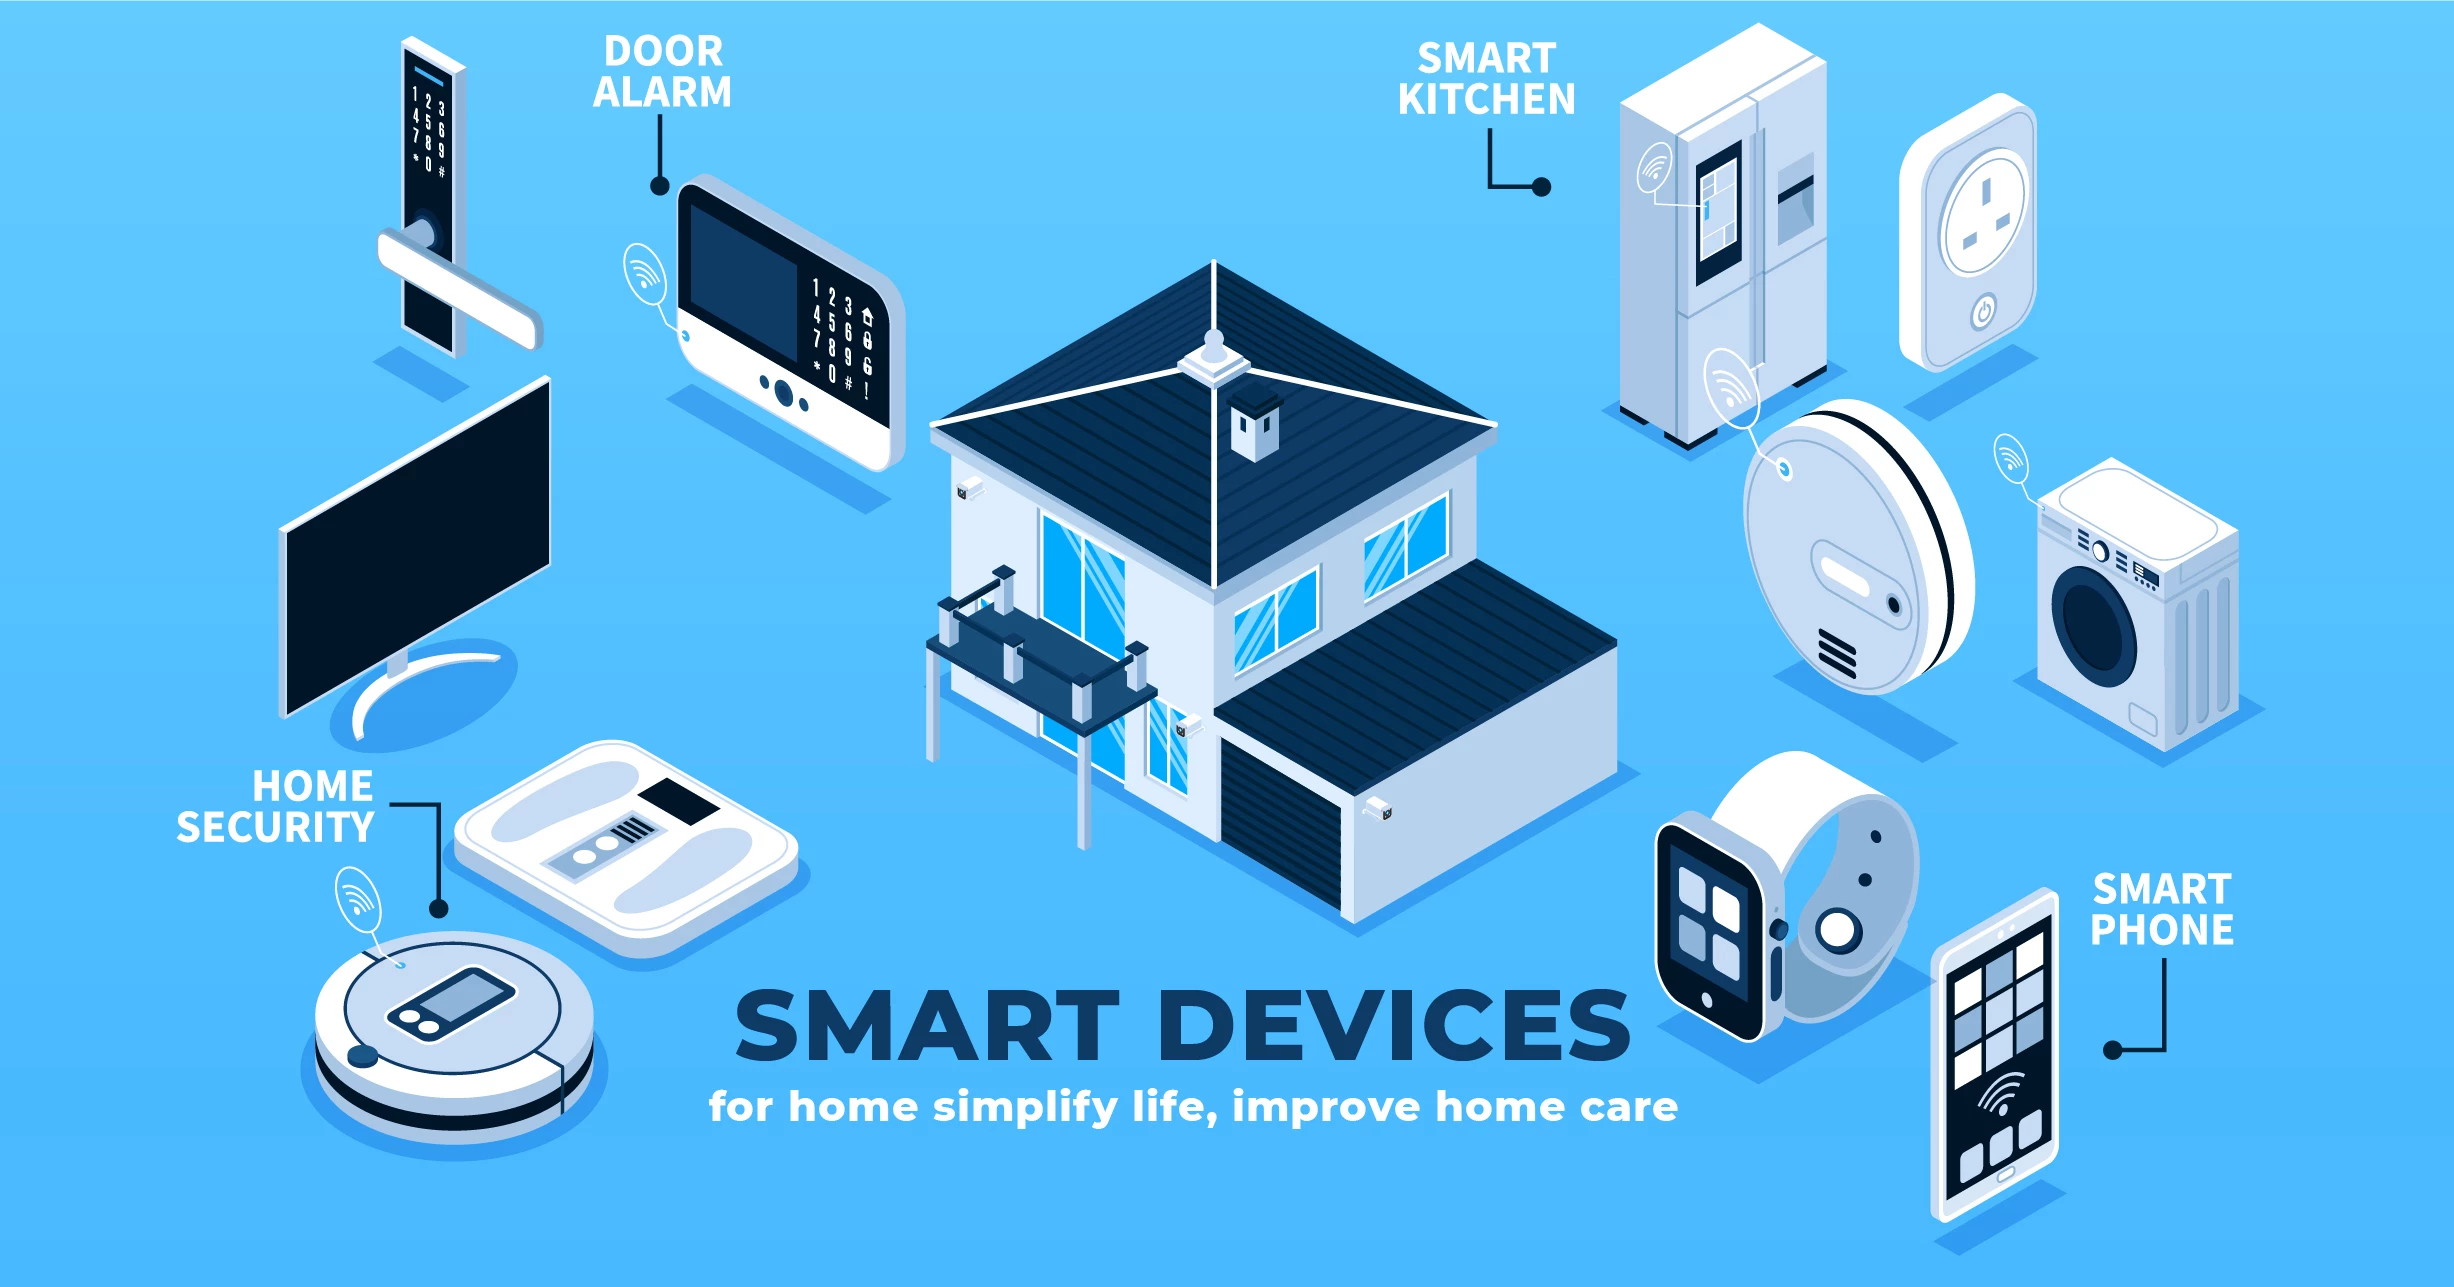 Smart devices for home simplify life, improve home care